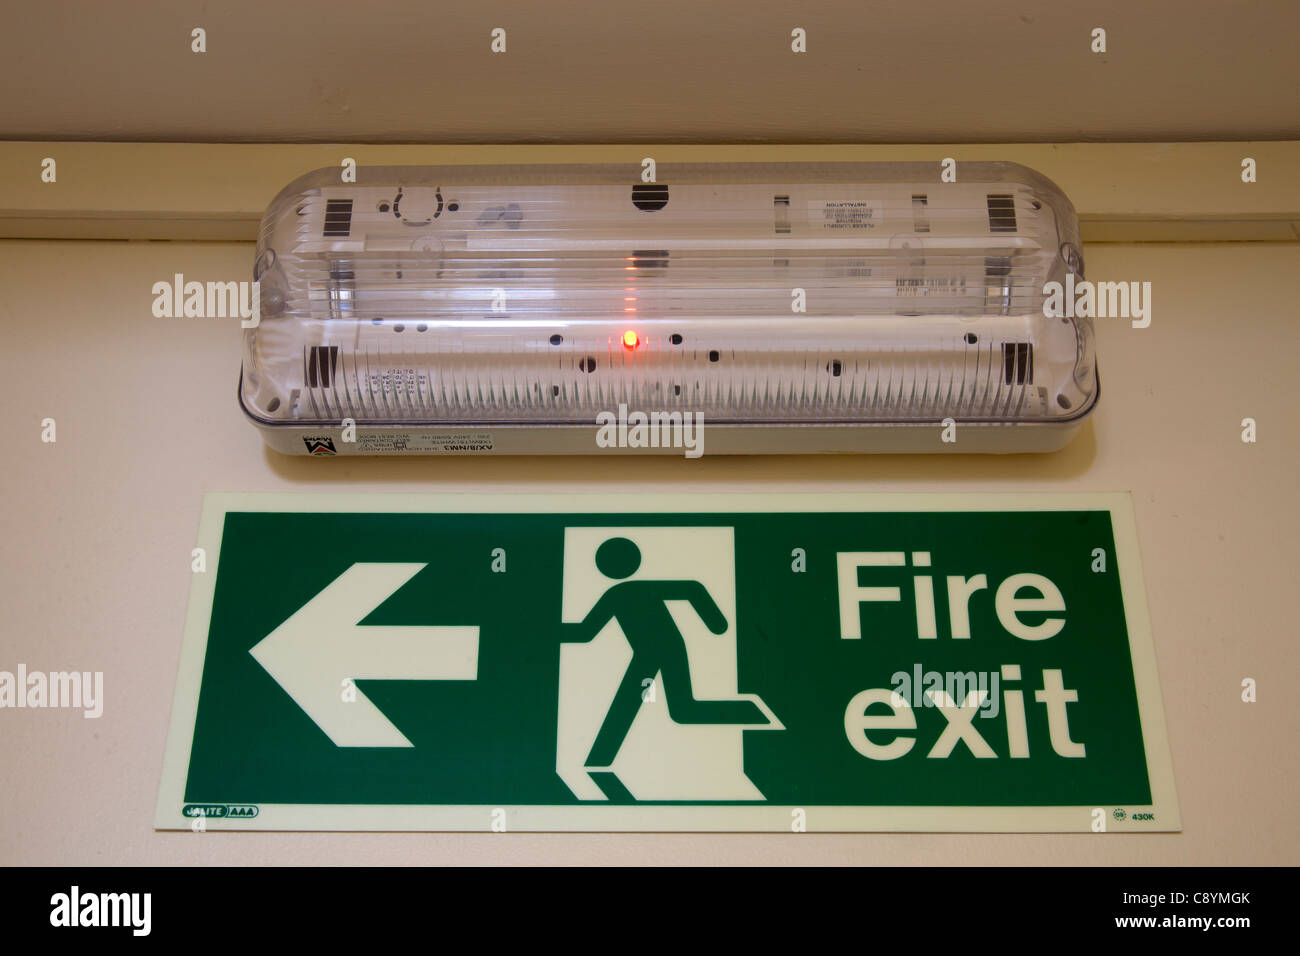 Emergency Exit Light with an luminous fire exit sign Stock Photo - Alamy